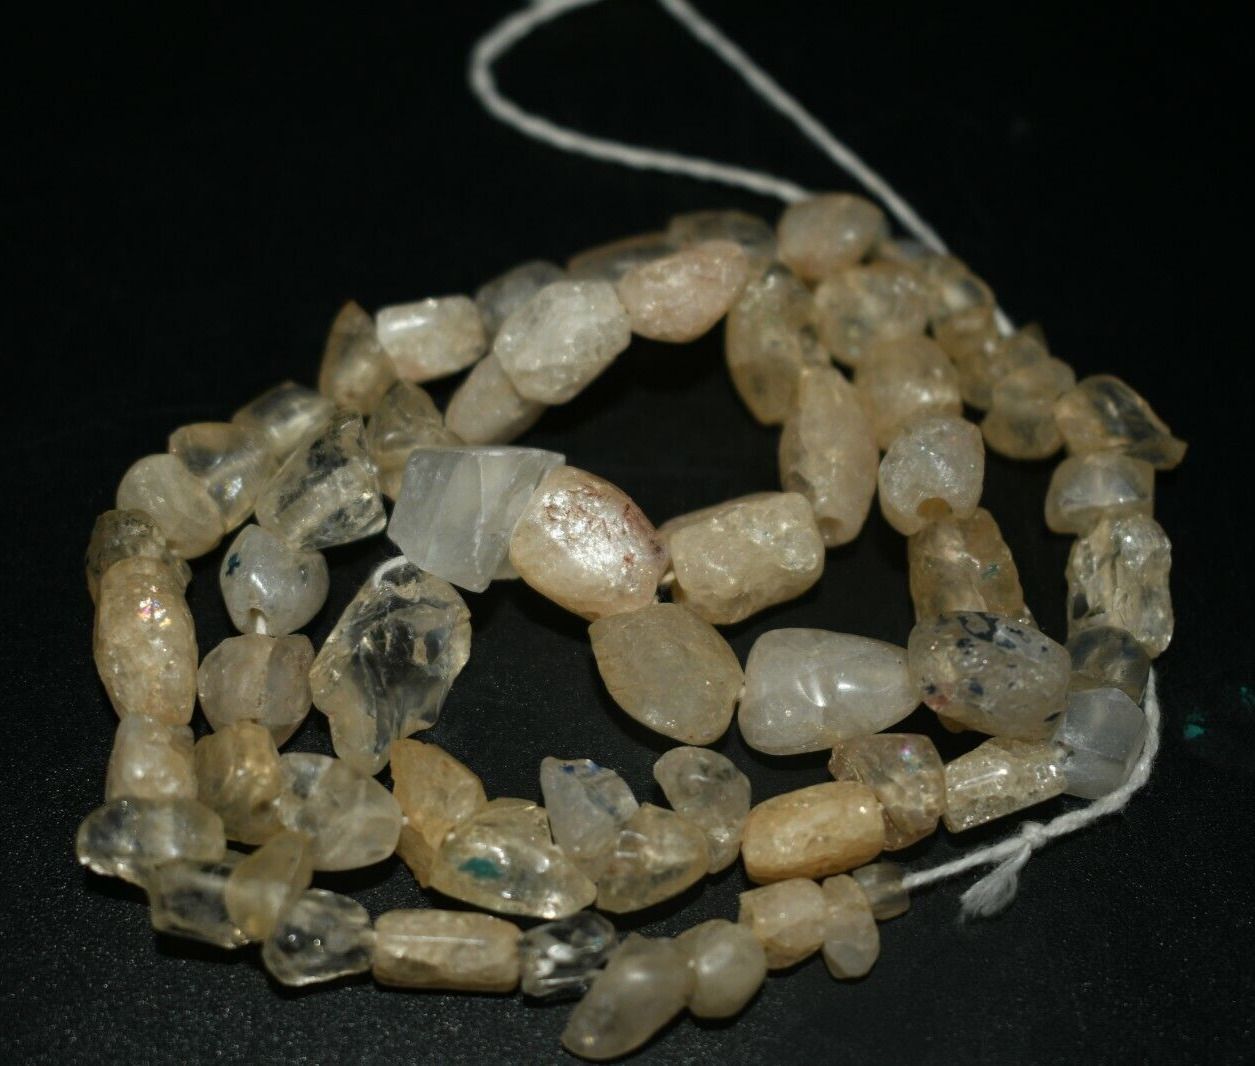 Genuine Ancient Early Roman Crystal Beads Necklace ( 67 Beads in 1 necklace)